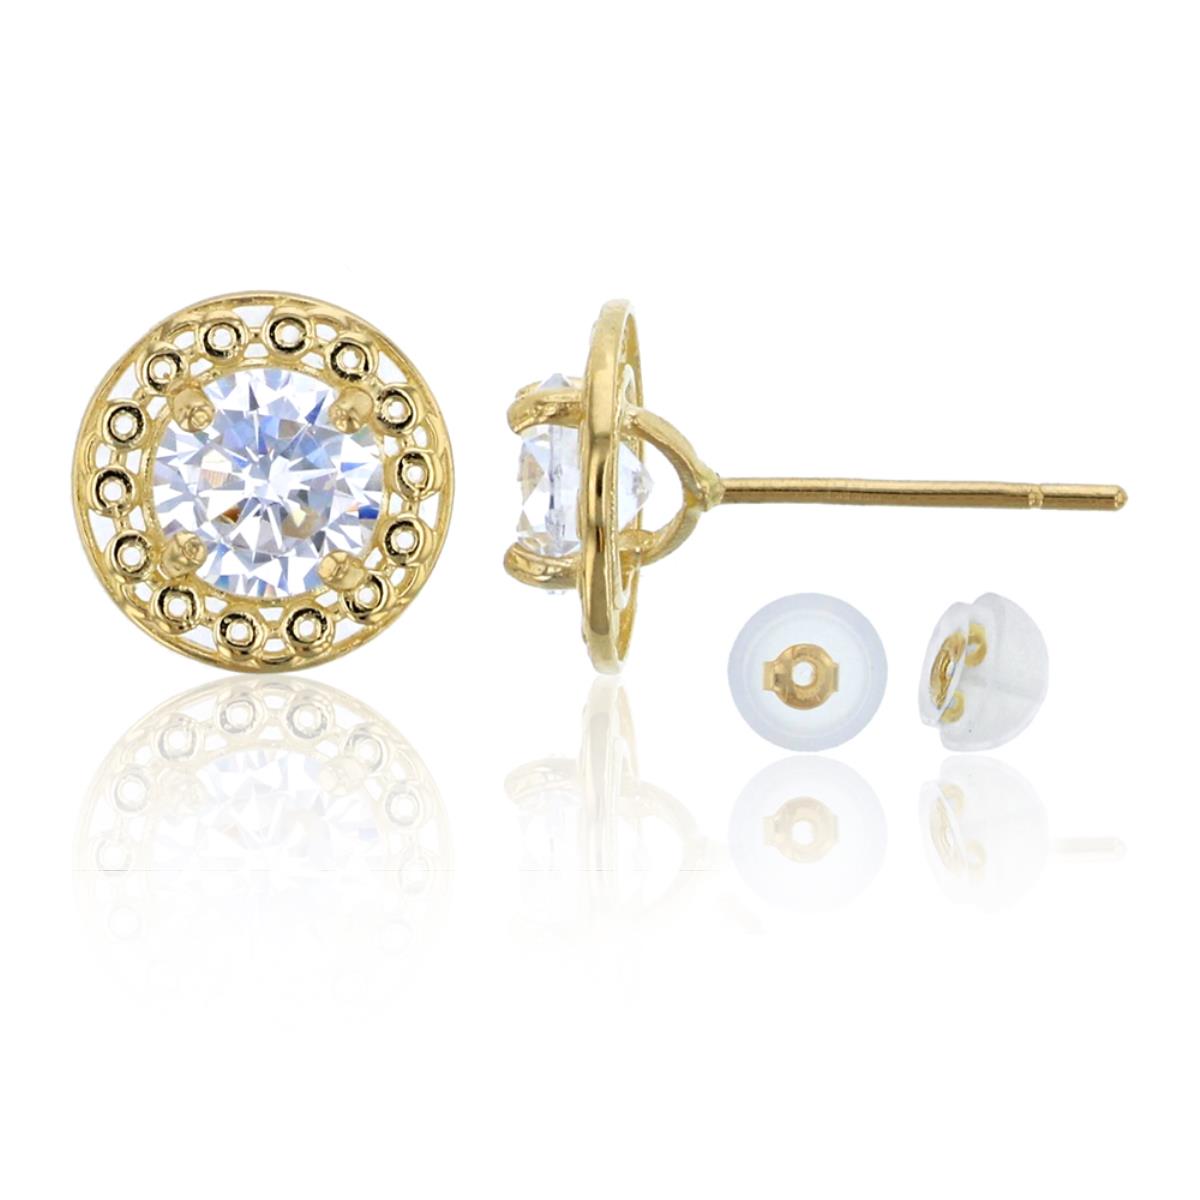 14K Yellow Gold 5mm Round Cut CZ Filigree Stud Earring & 14K Silicone Back